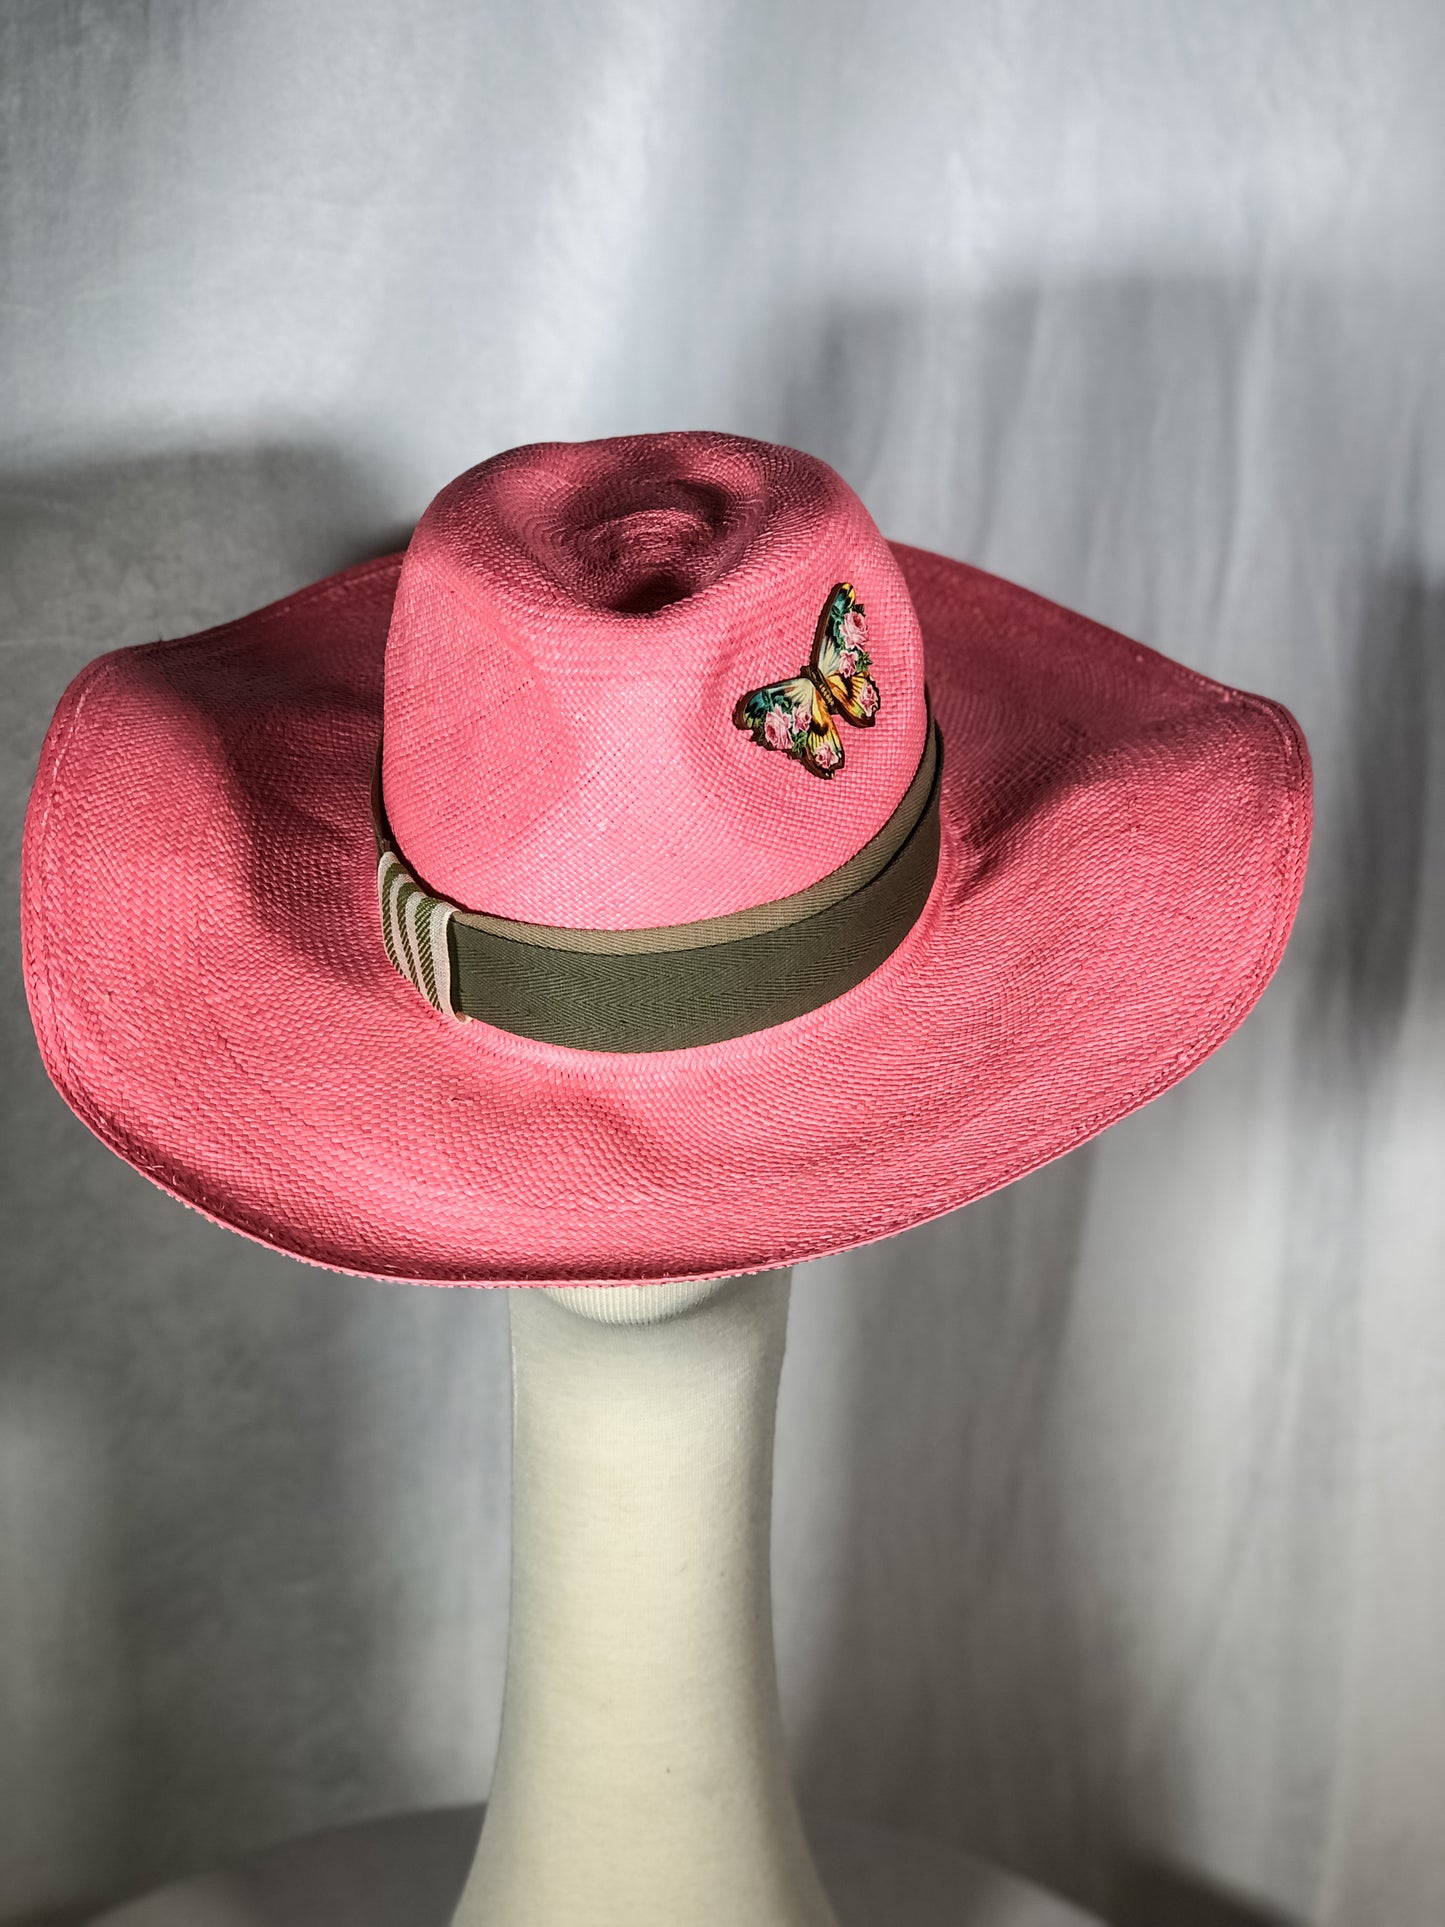 The Dirty Sheila Summer Hat with a BAD Attitude by Possum Ball